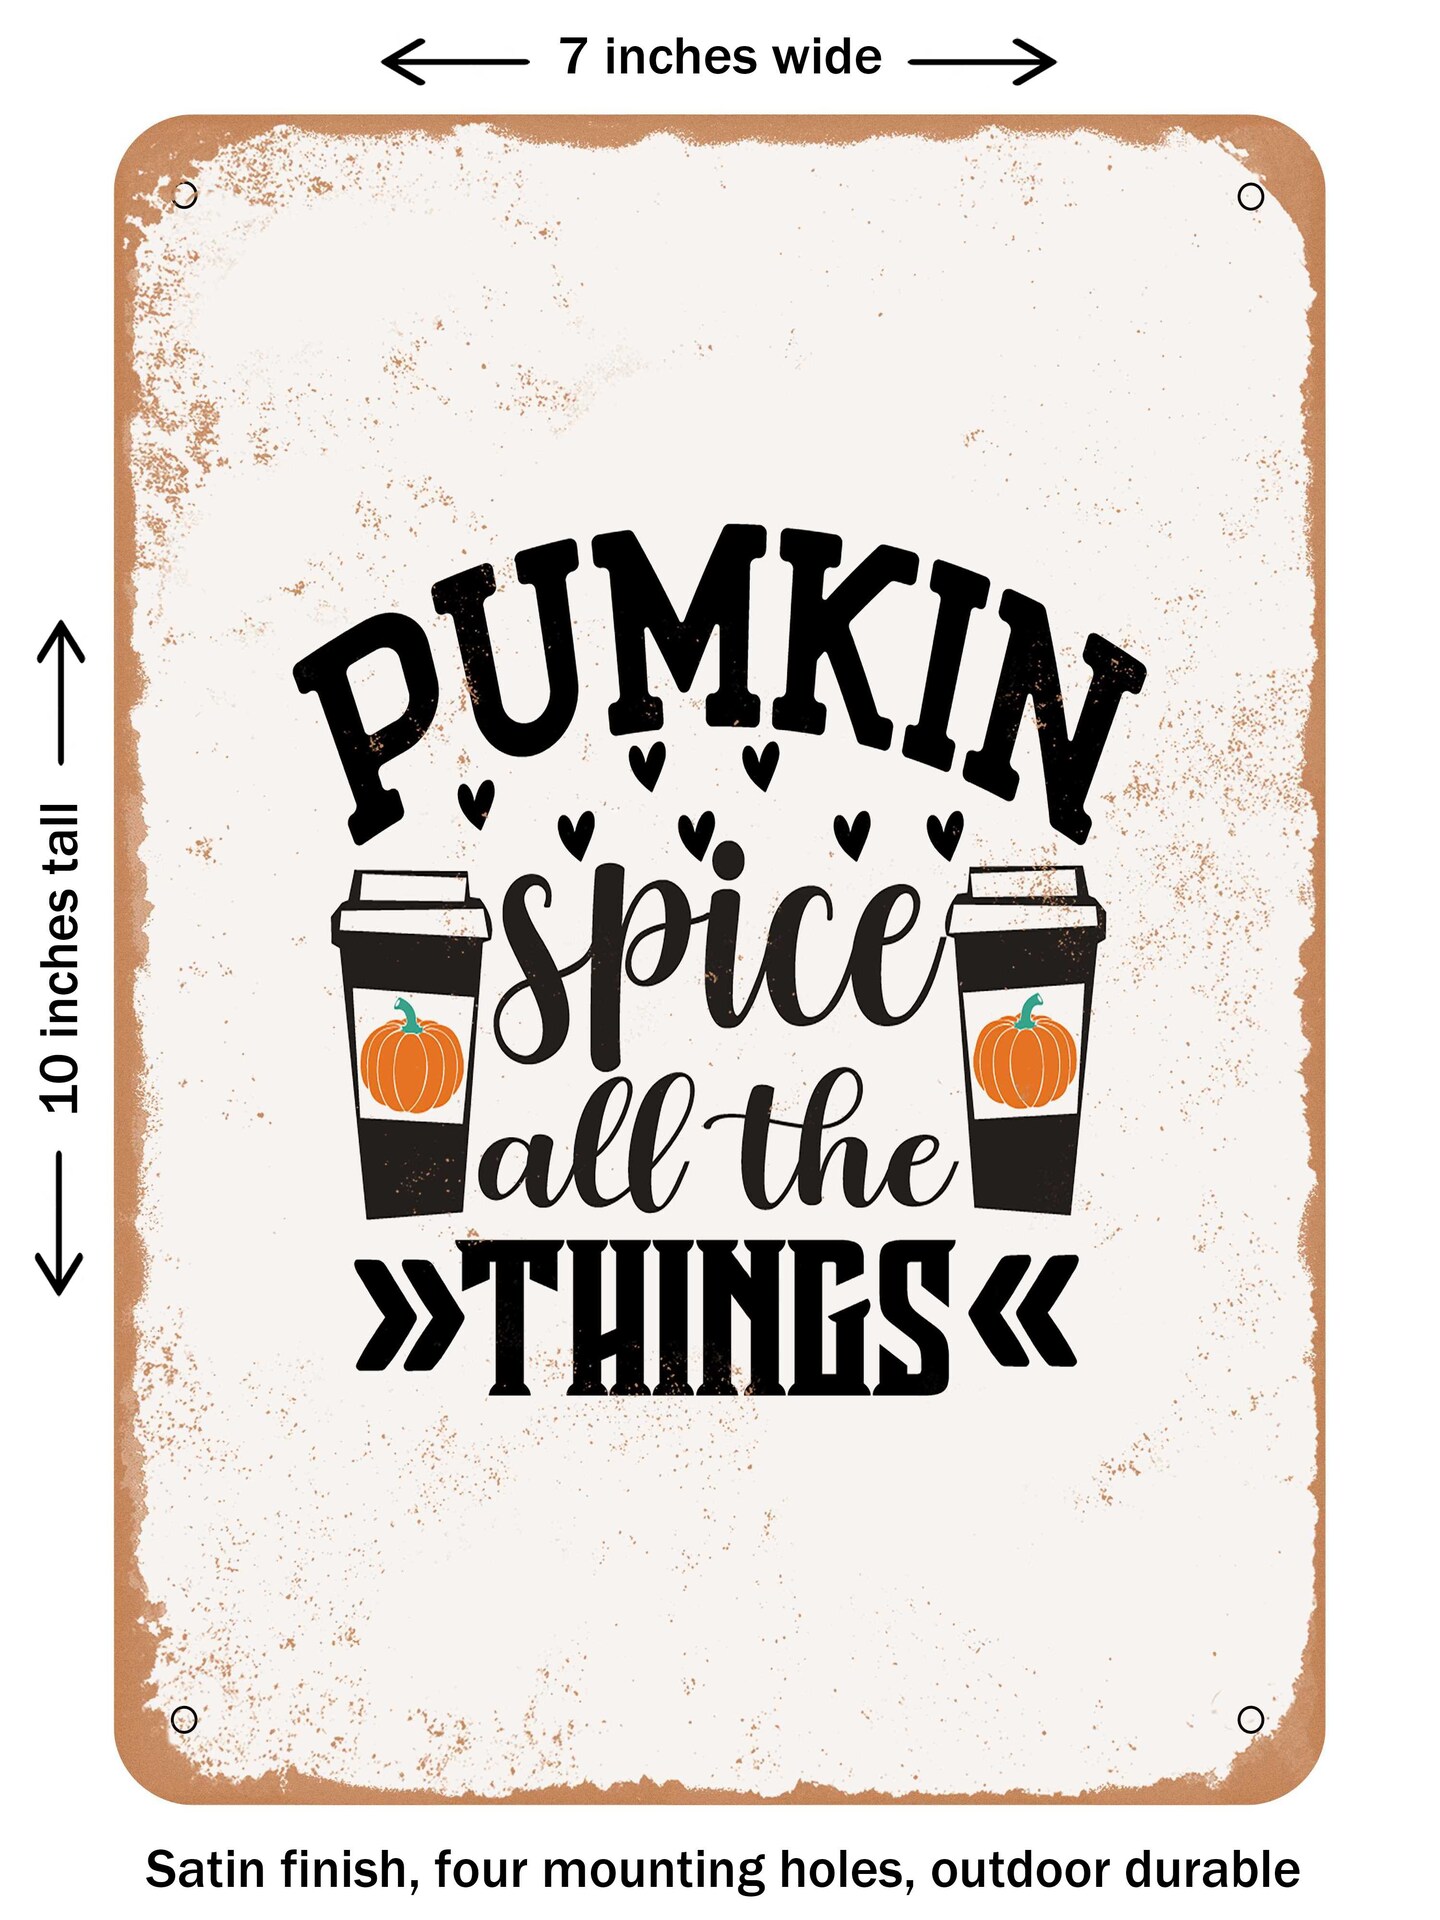 DECORATIVE METAL SIGN - Pumkin Spice All the Things  - Vintage Rusty Look